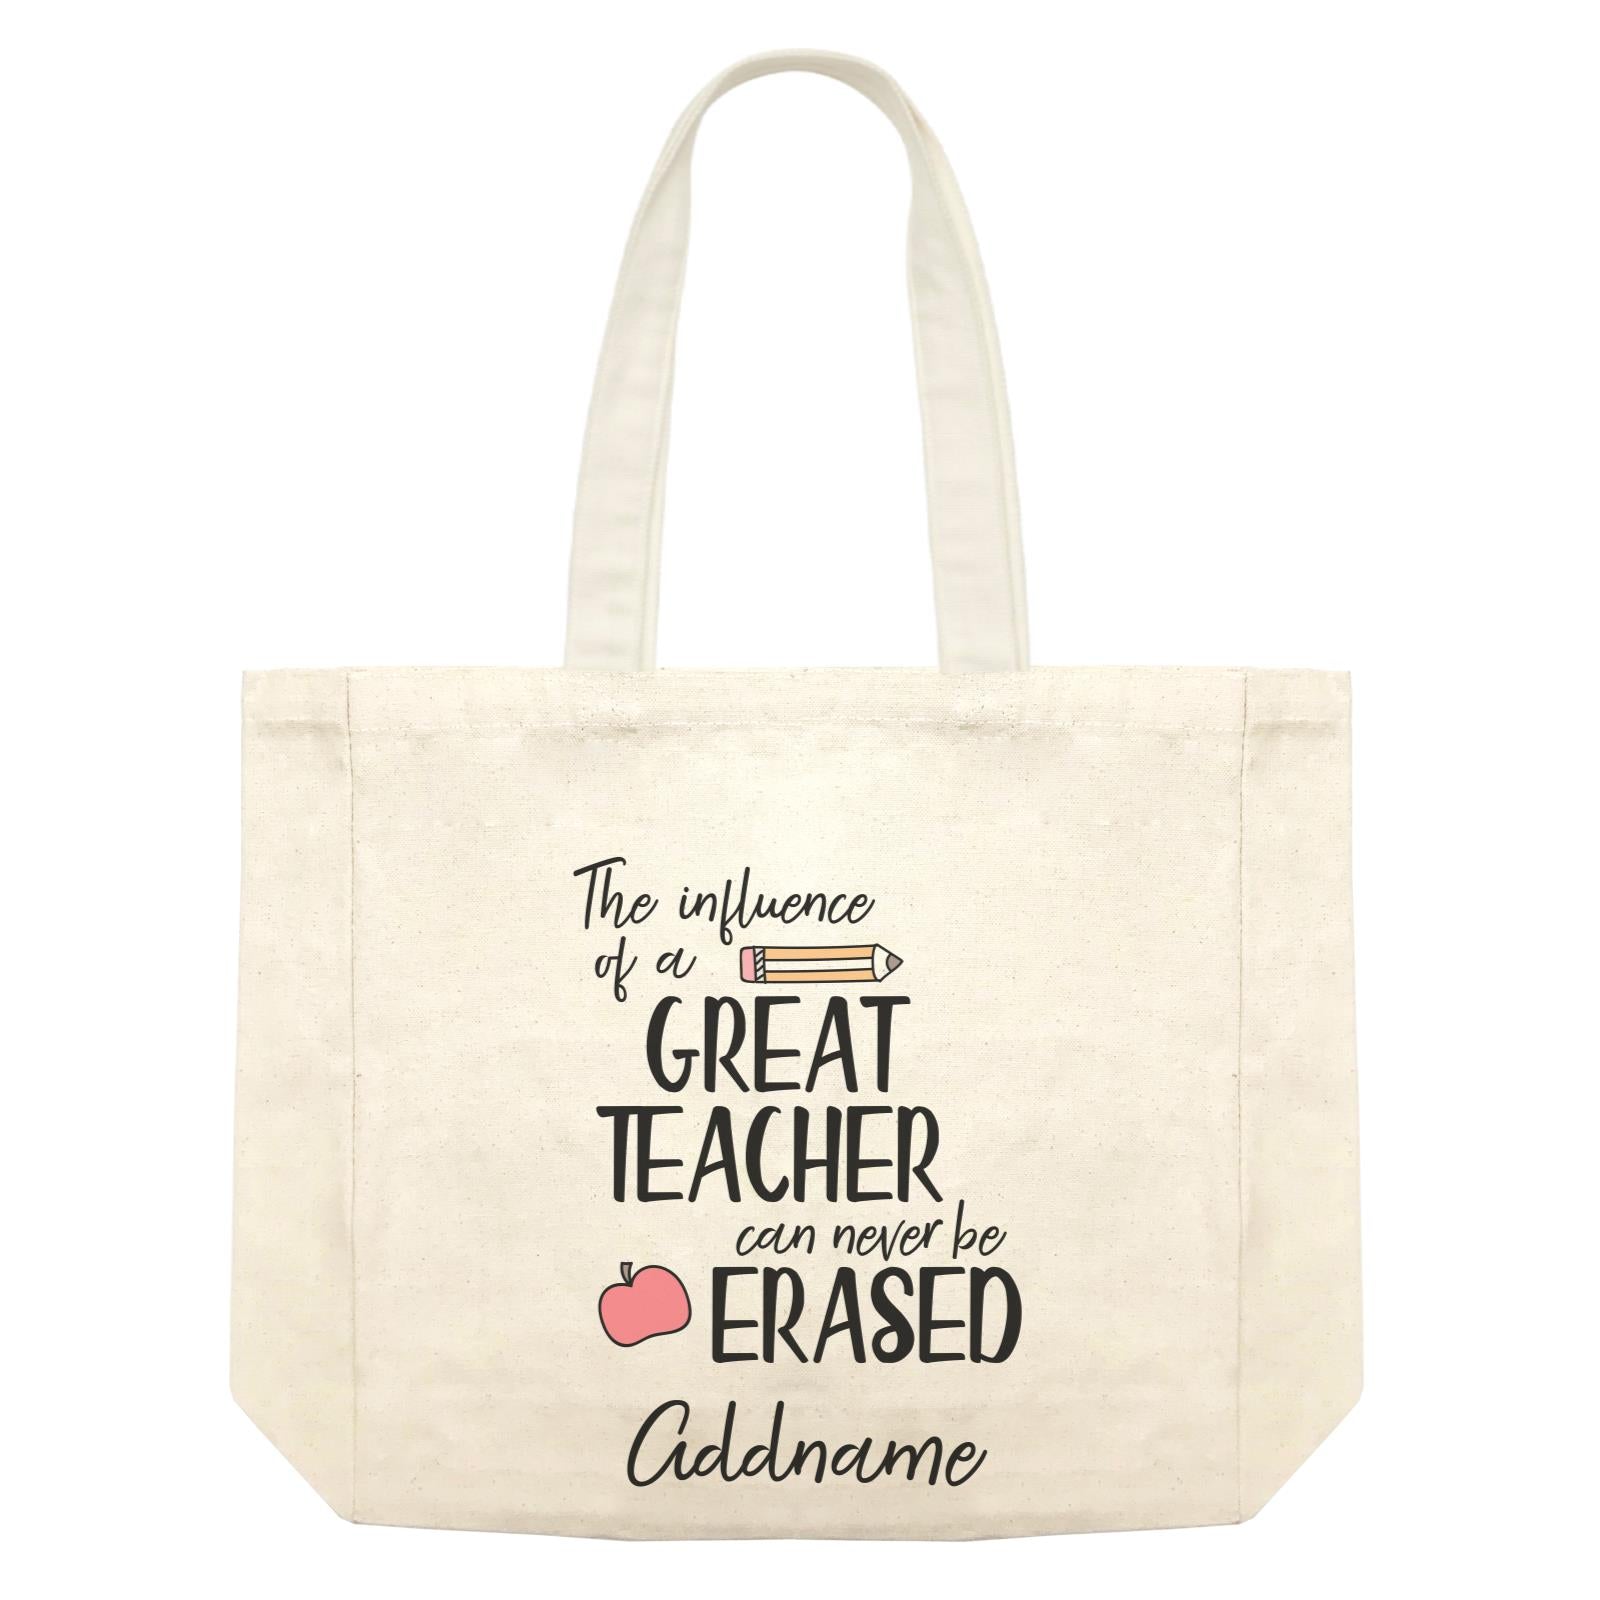 Teacher Quotes The Influence Of A Great Teacher Can Never Be Erased Addname Shopping Bag